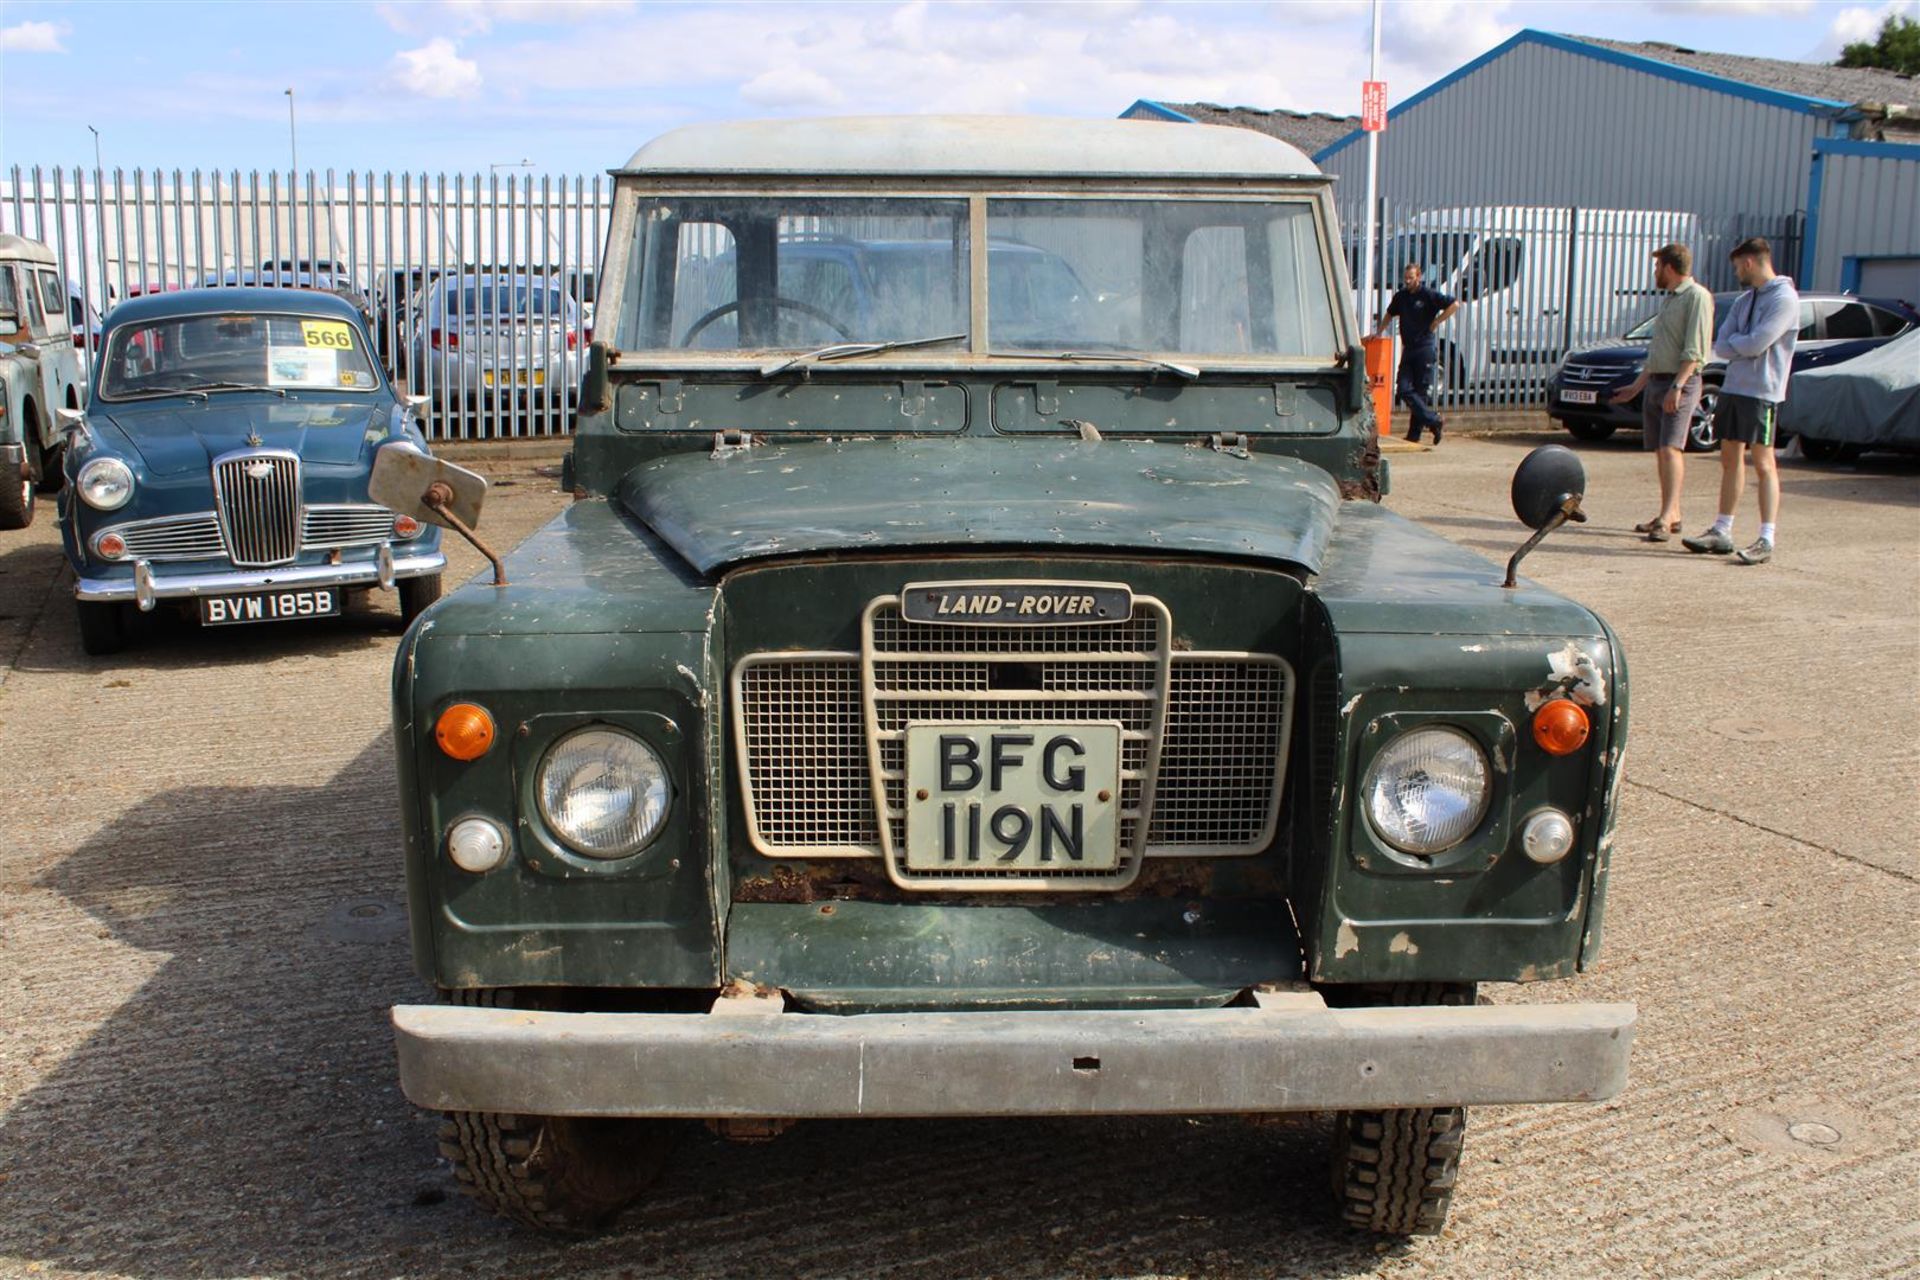 1974 Land Rover Series III Pick-up - Image 6 of 22